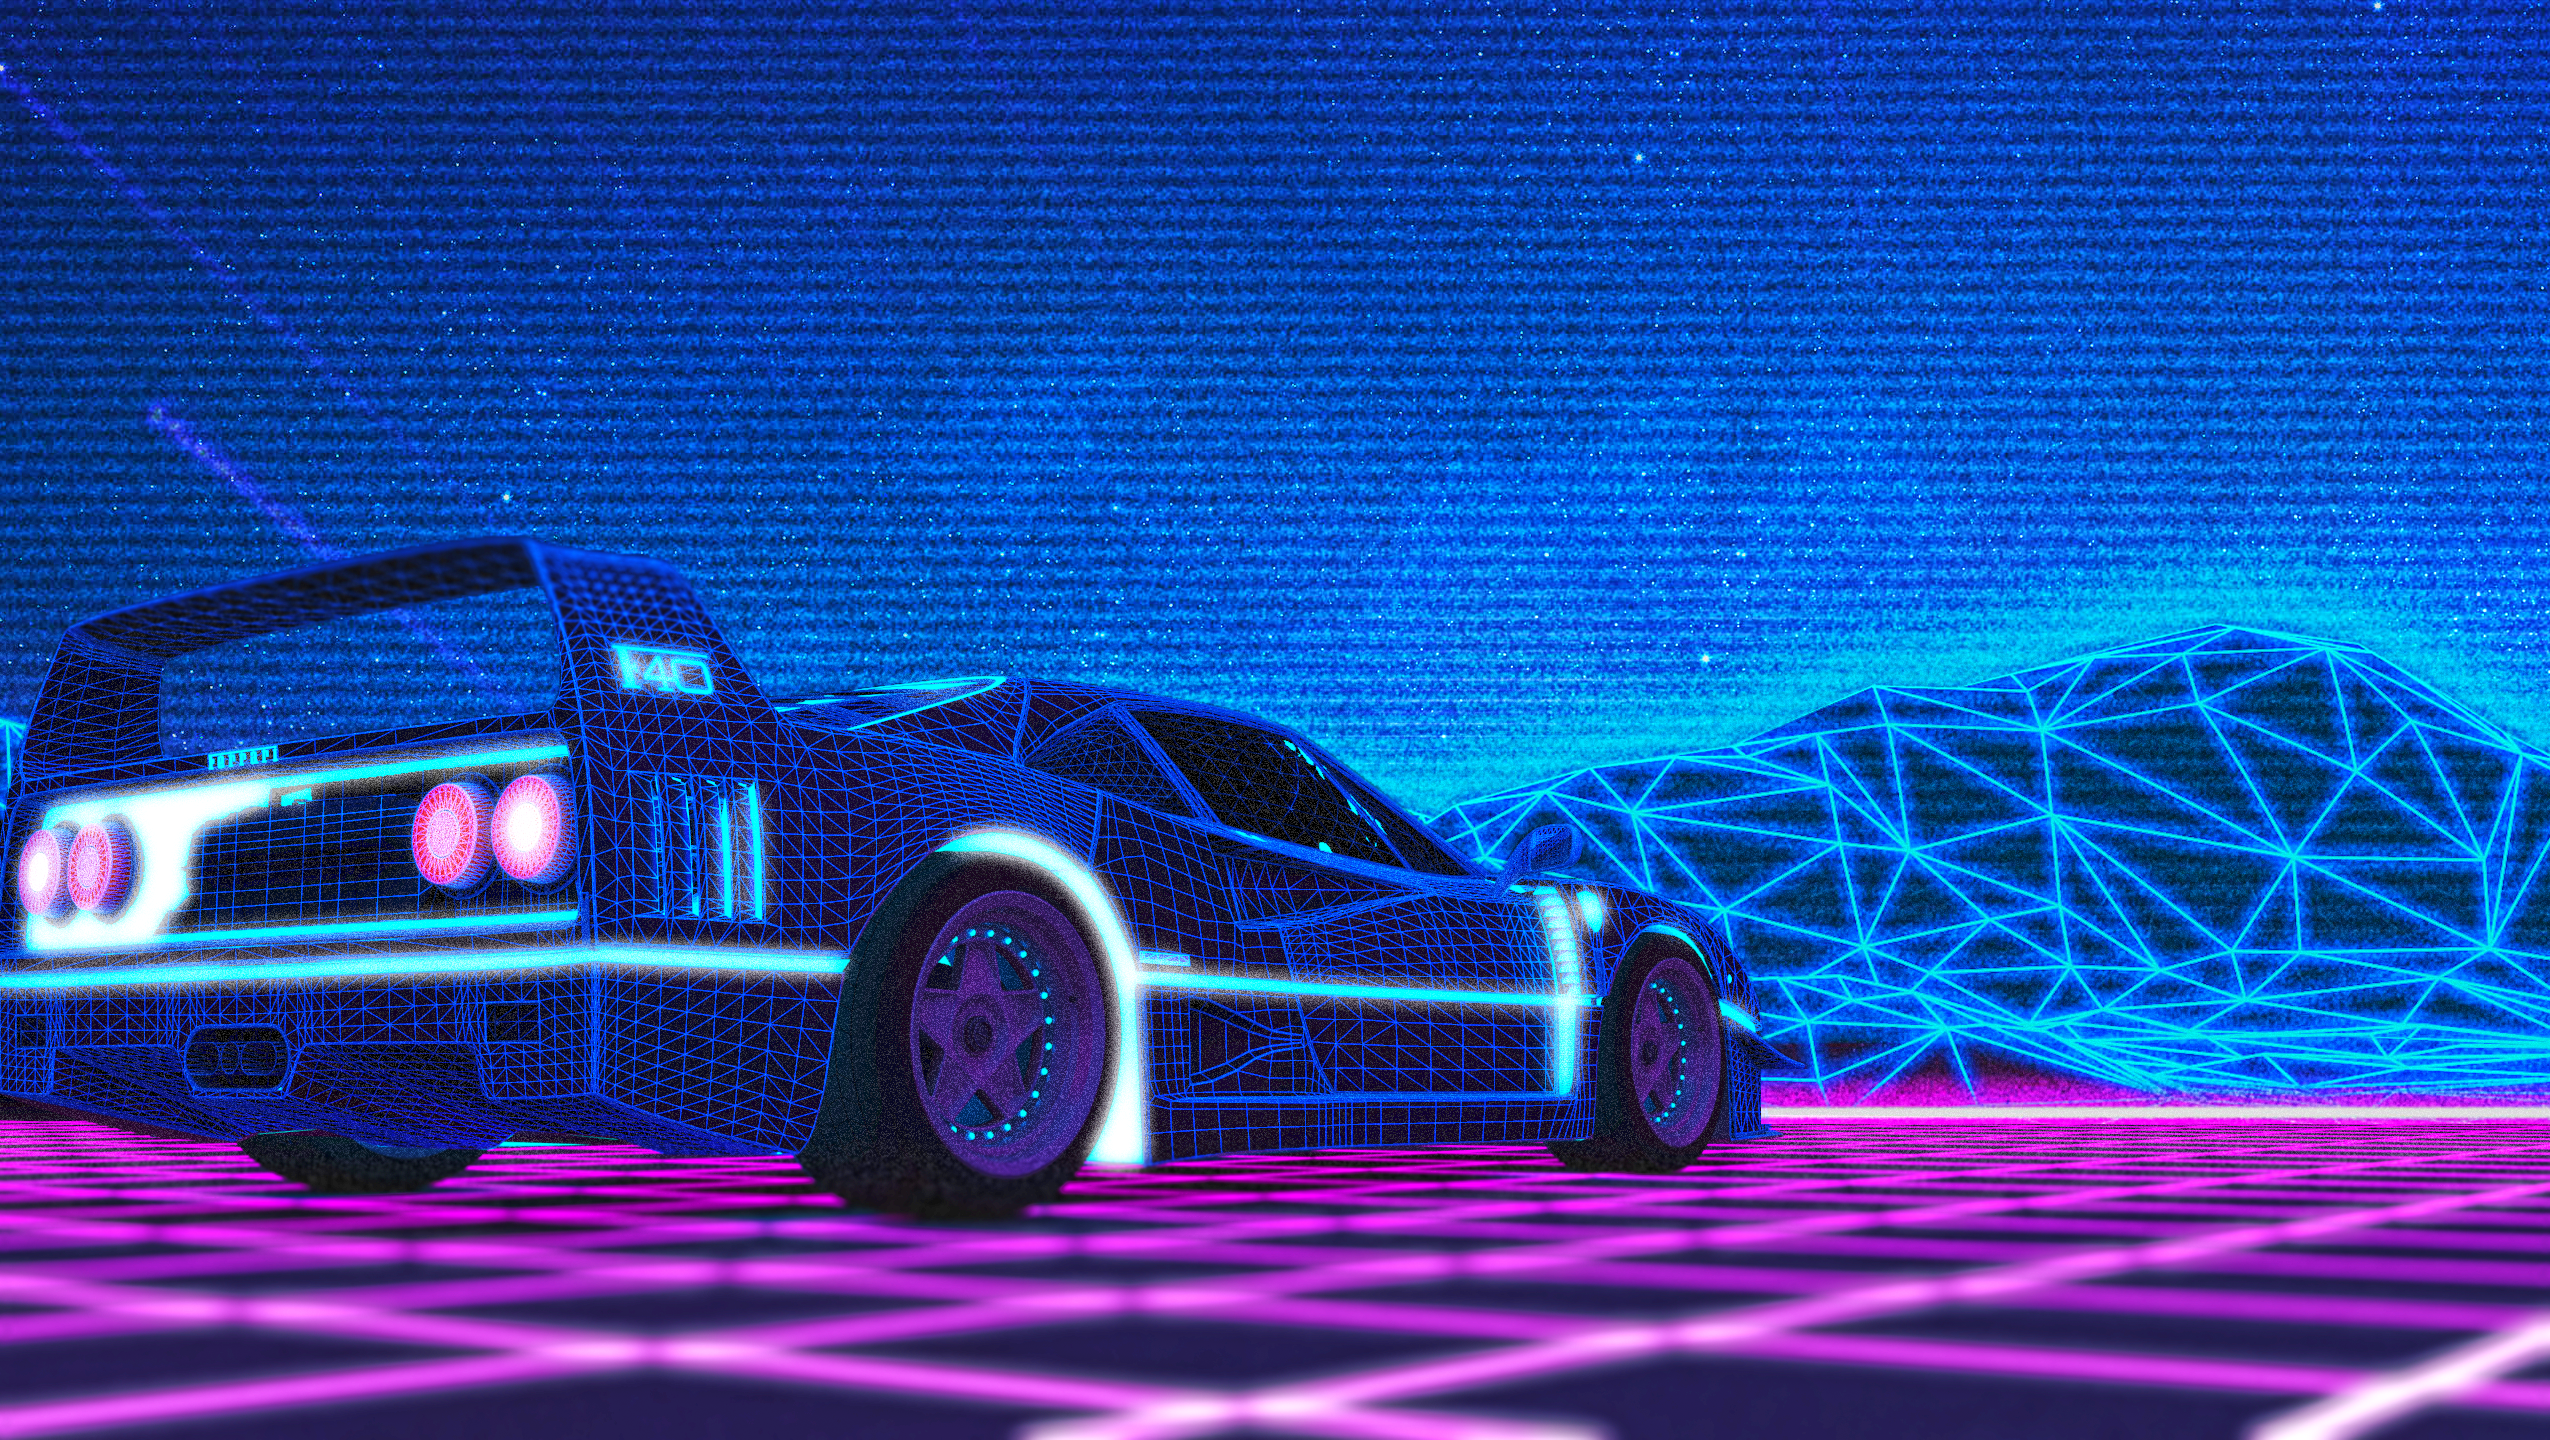 Ferrari F40 80s Synthwave Wallpaper by NIHILUSDESIGNS on